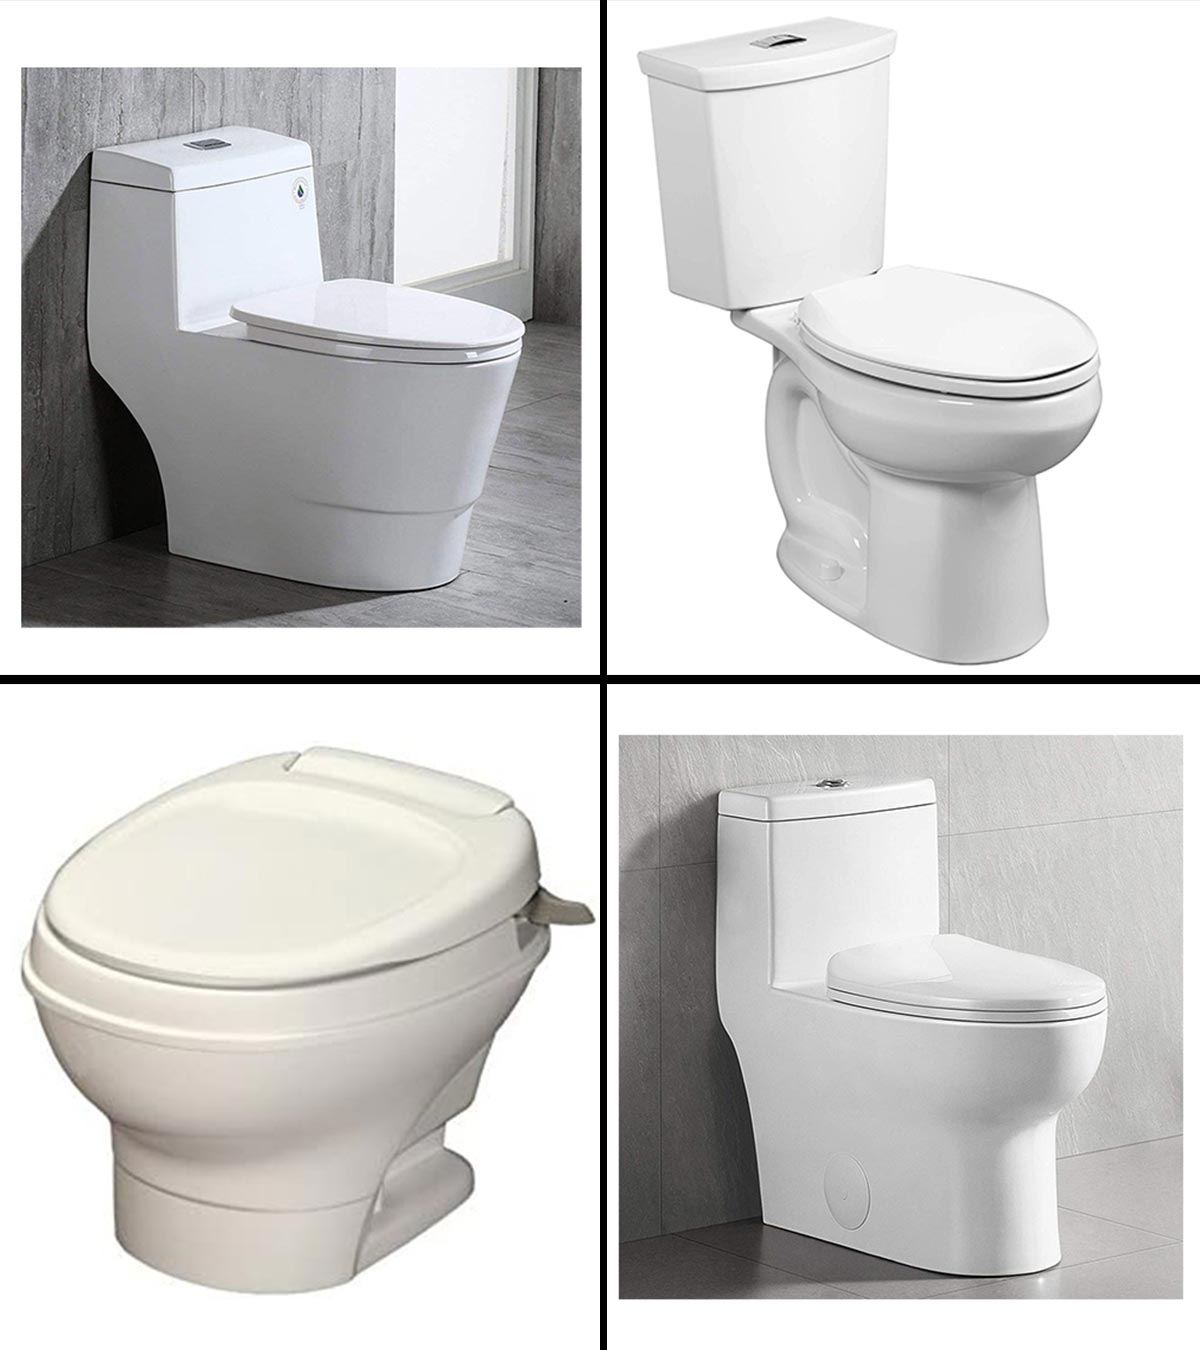 What's a Comfort Height Toilet?